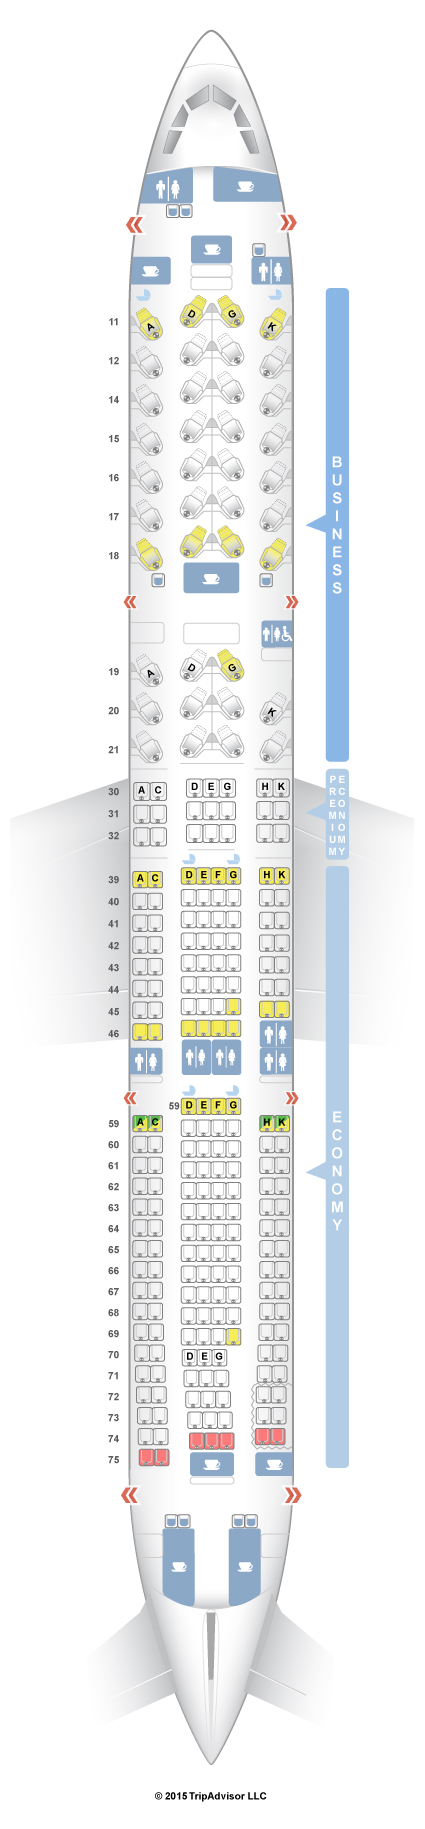 A330 300 Seat Map Cathay Pacific SeatGuru Seat Map Cathay Pacific   SeatGuru